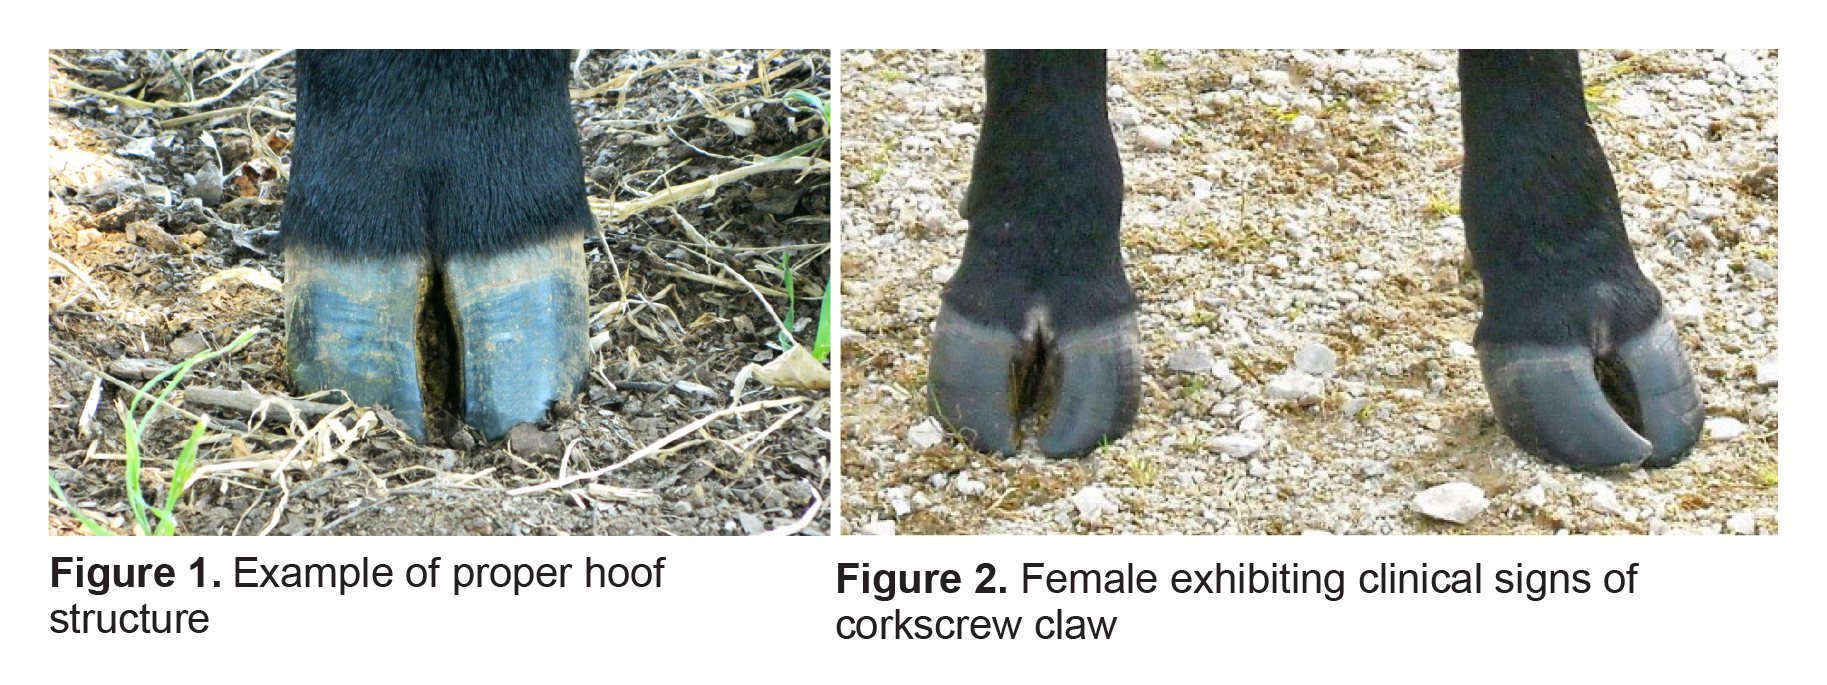 Figure 1. Example of proper hoof structure. Figure 2. Female exhibiting clinical signs of corkscrew claw